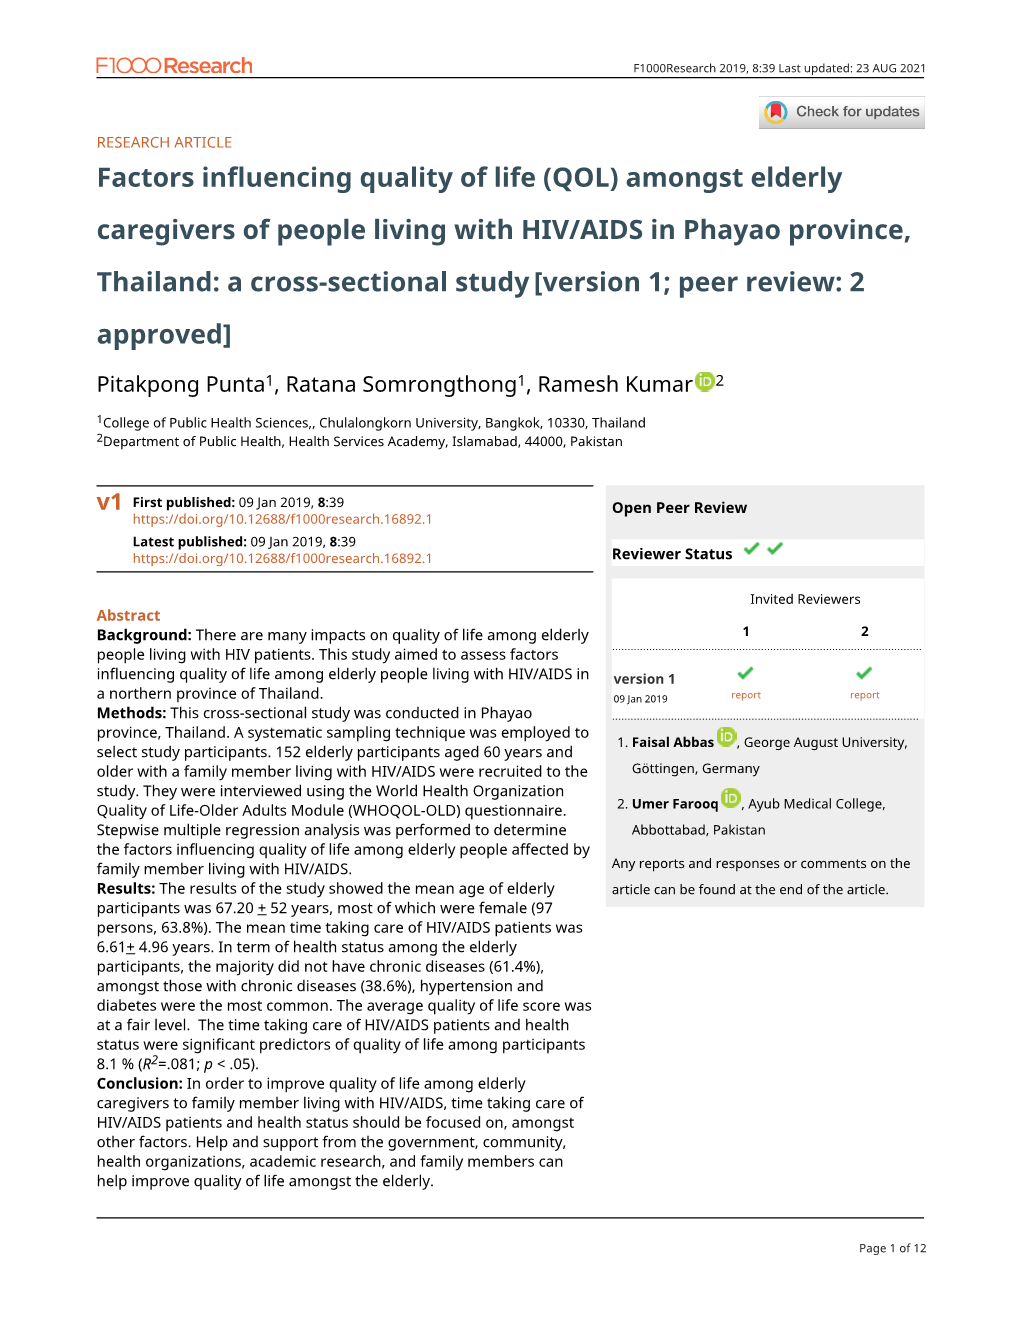 Factors Influencing Quality of Life (QOL) Amongst Elderly Caregivers of People Living with HIV/AIDS in Phayao Province